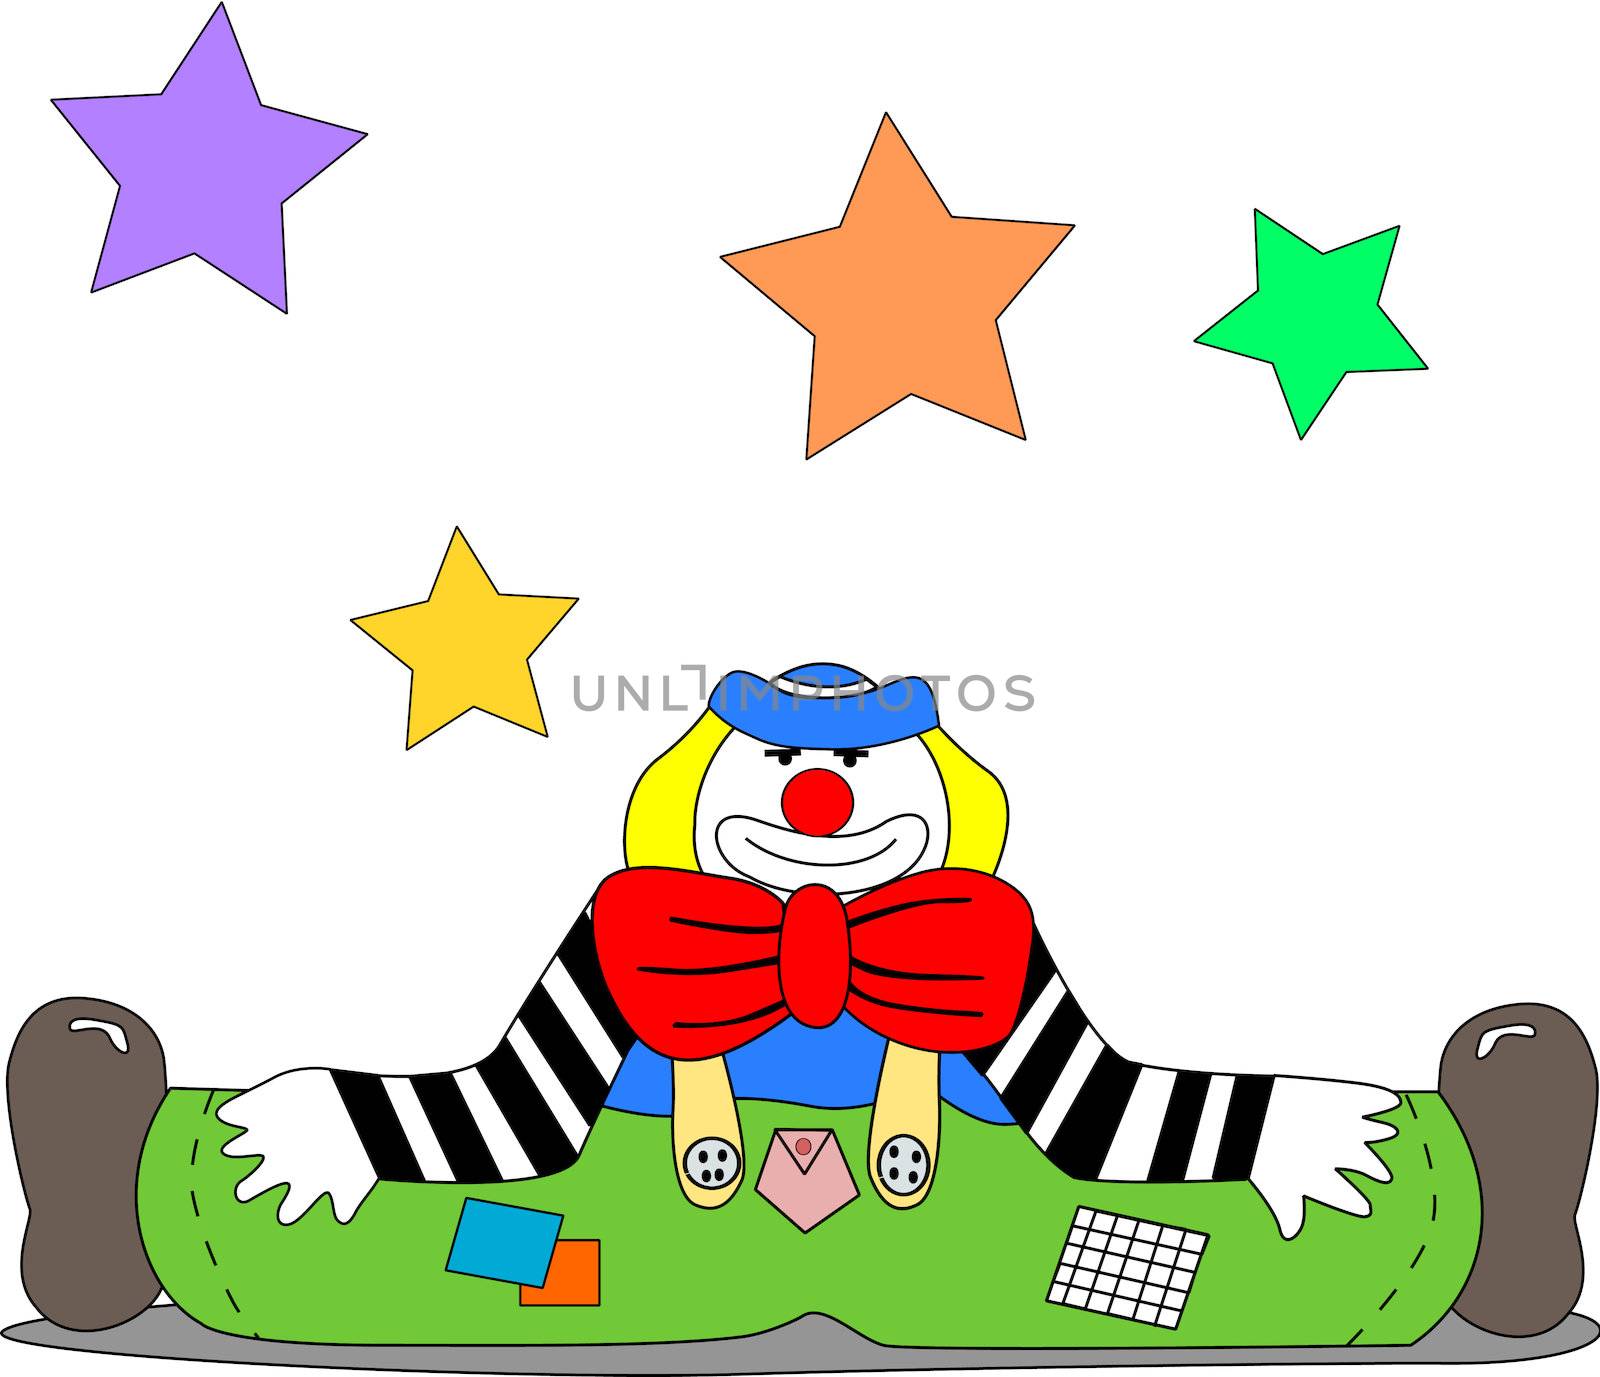 A cheerful clown sits on the ground with open legs with stars hanging in the air.